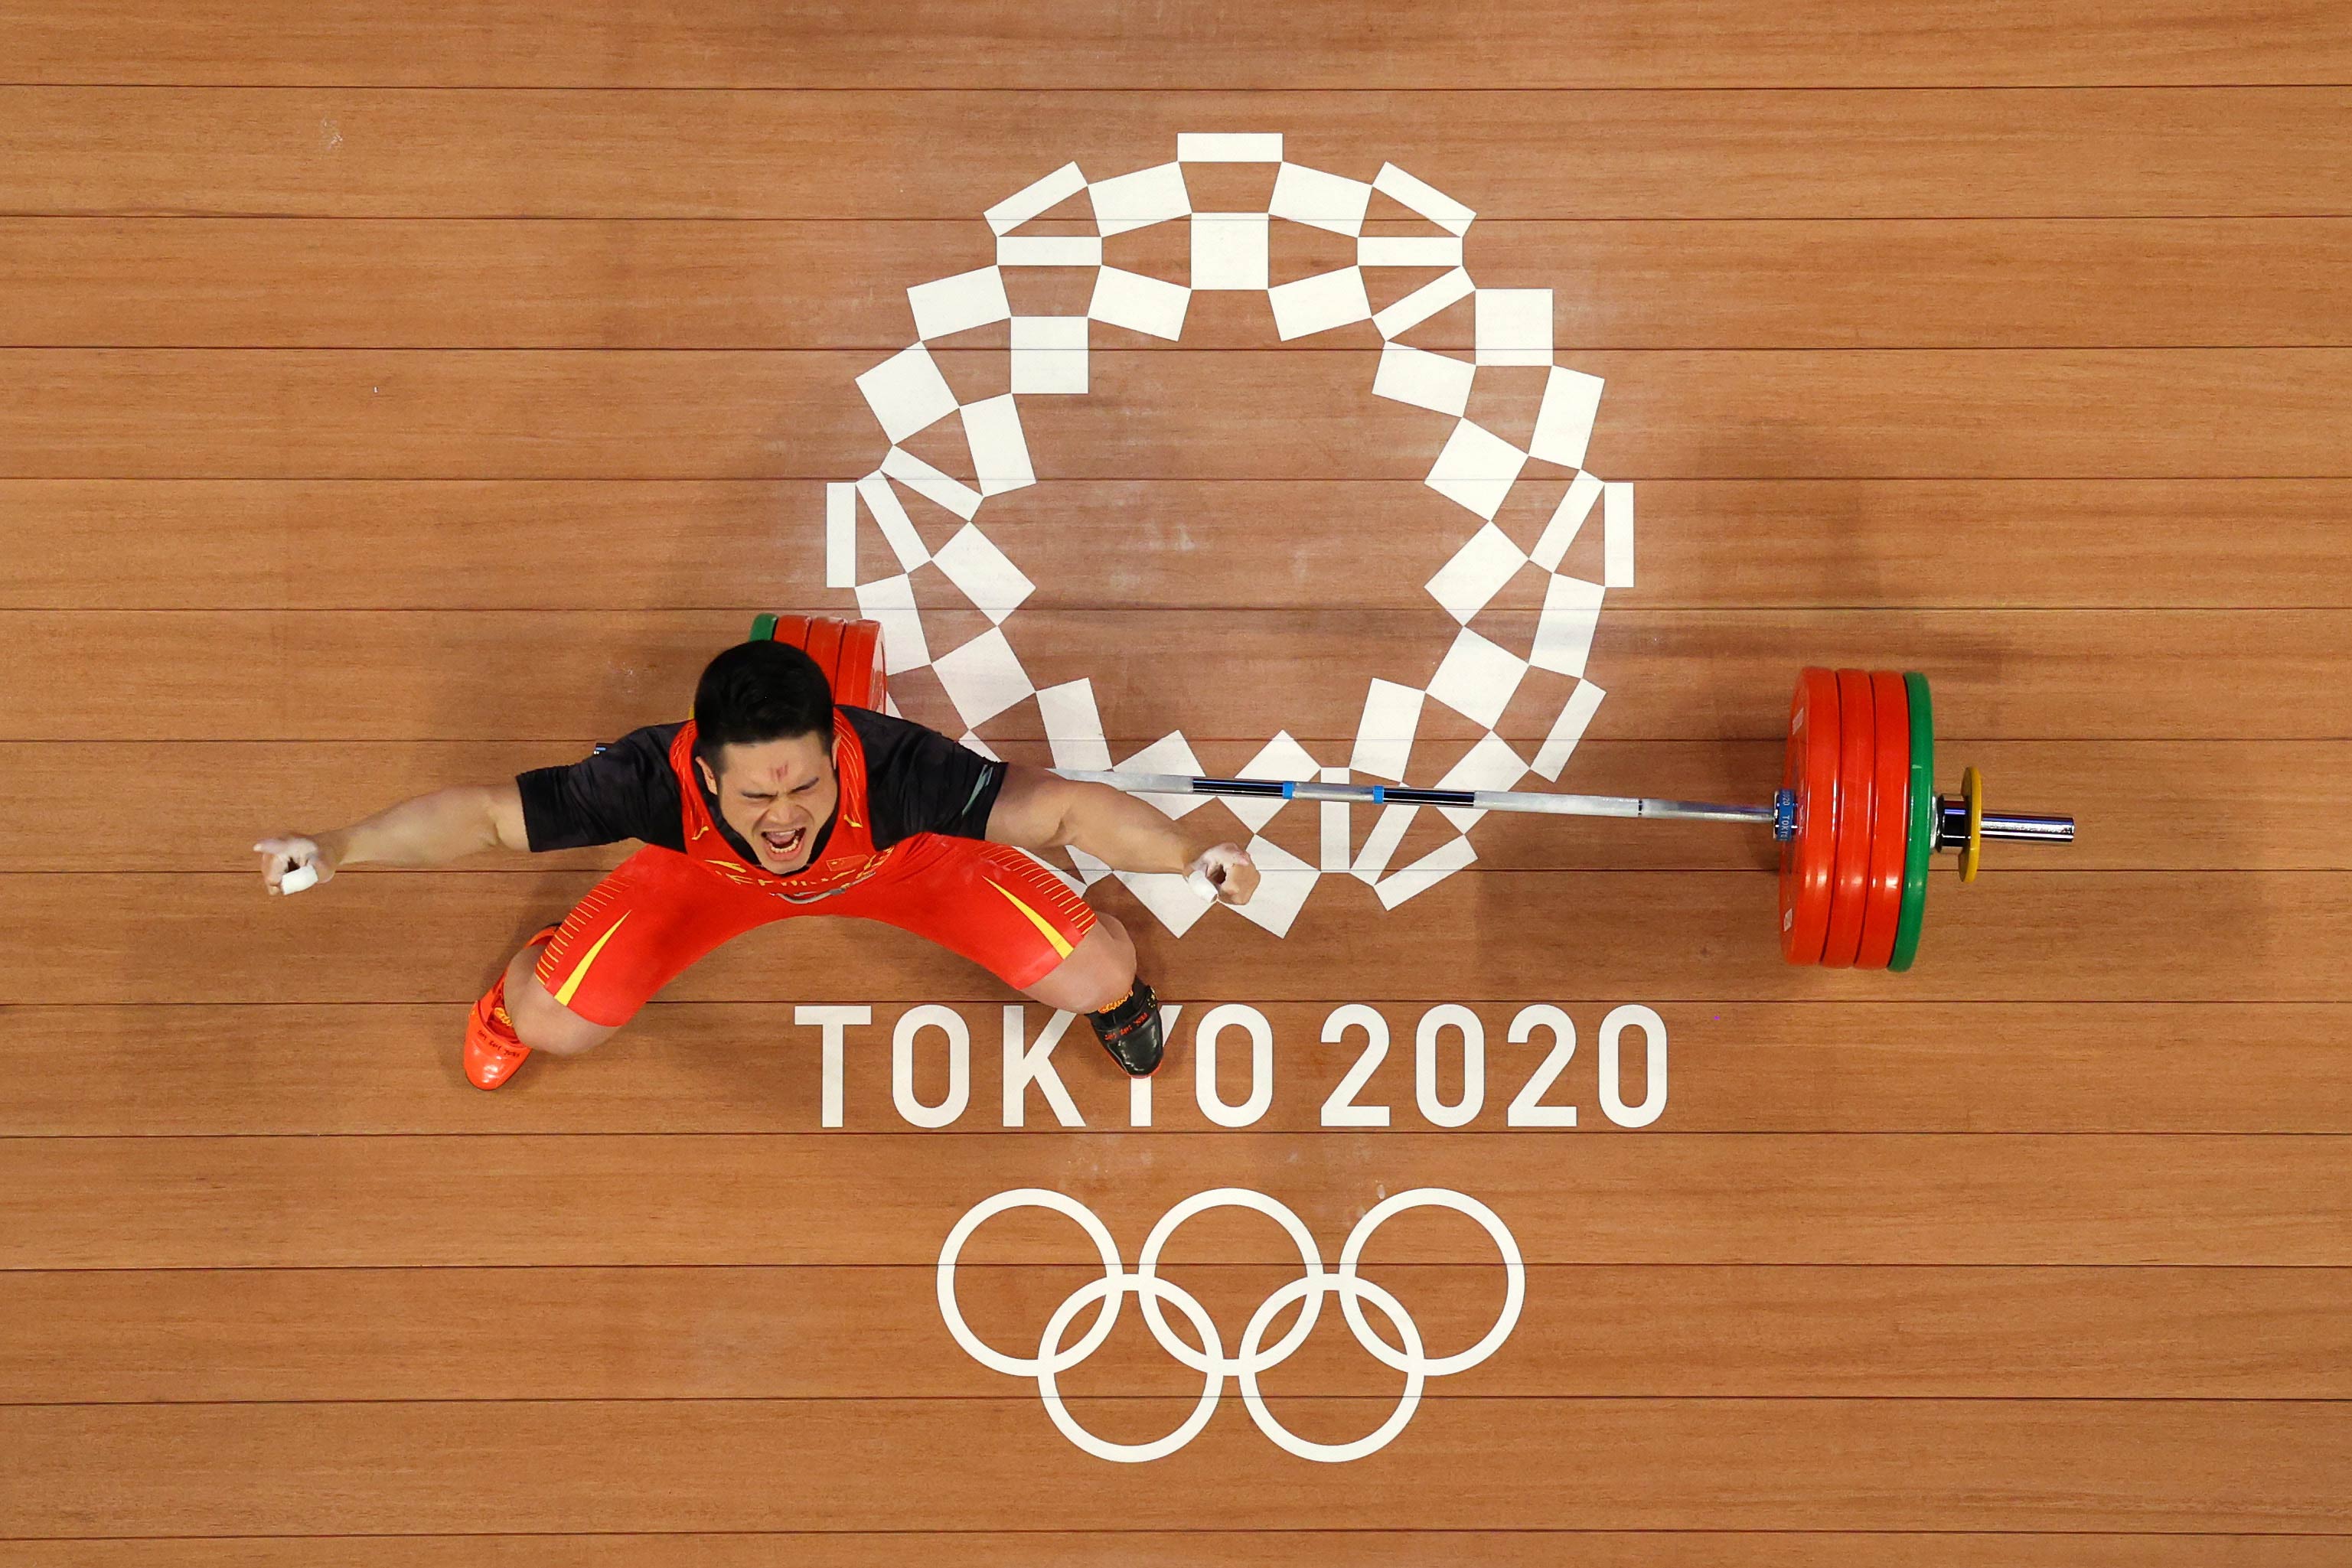 China's Shi Zhiyong celebrates after winning the gold medal and setting a new Olympic record in the 73kg weightlifting event on July 28.